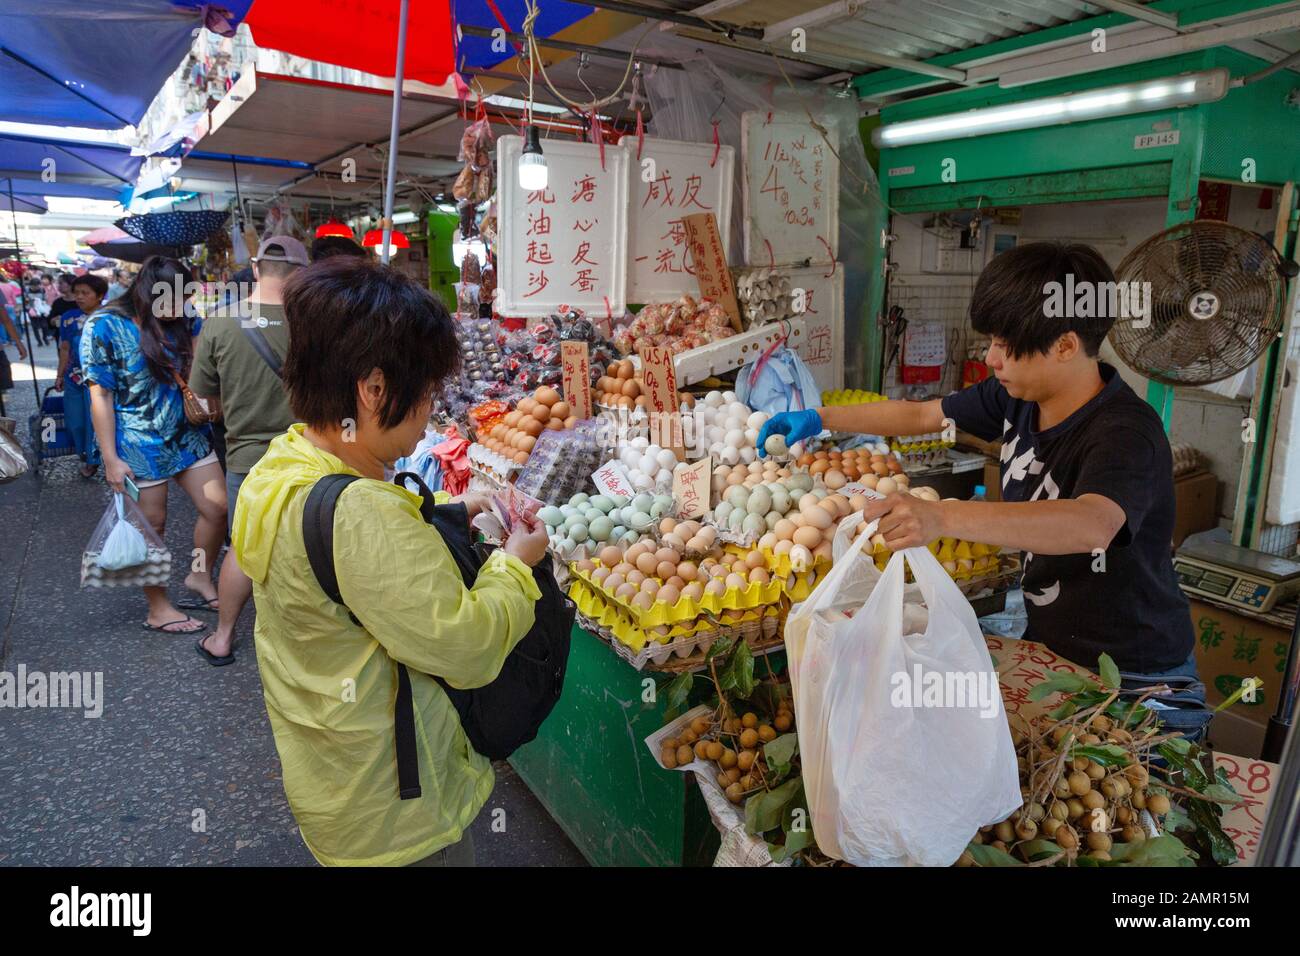 Asian lifestyle; People buying food and eggs at a market stall, Bowring street, kowloon Hong Kong Asia Stock Photo